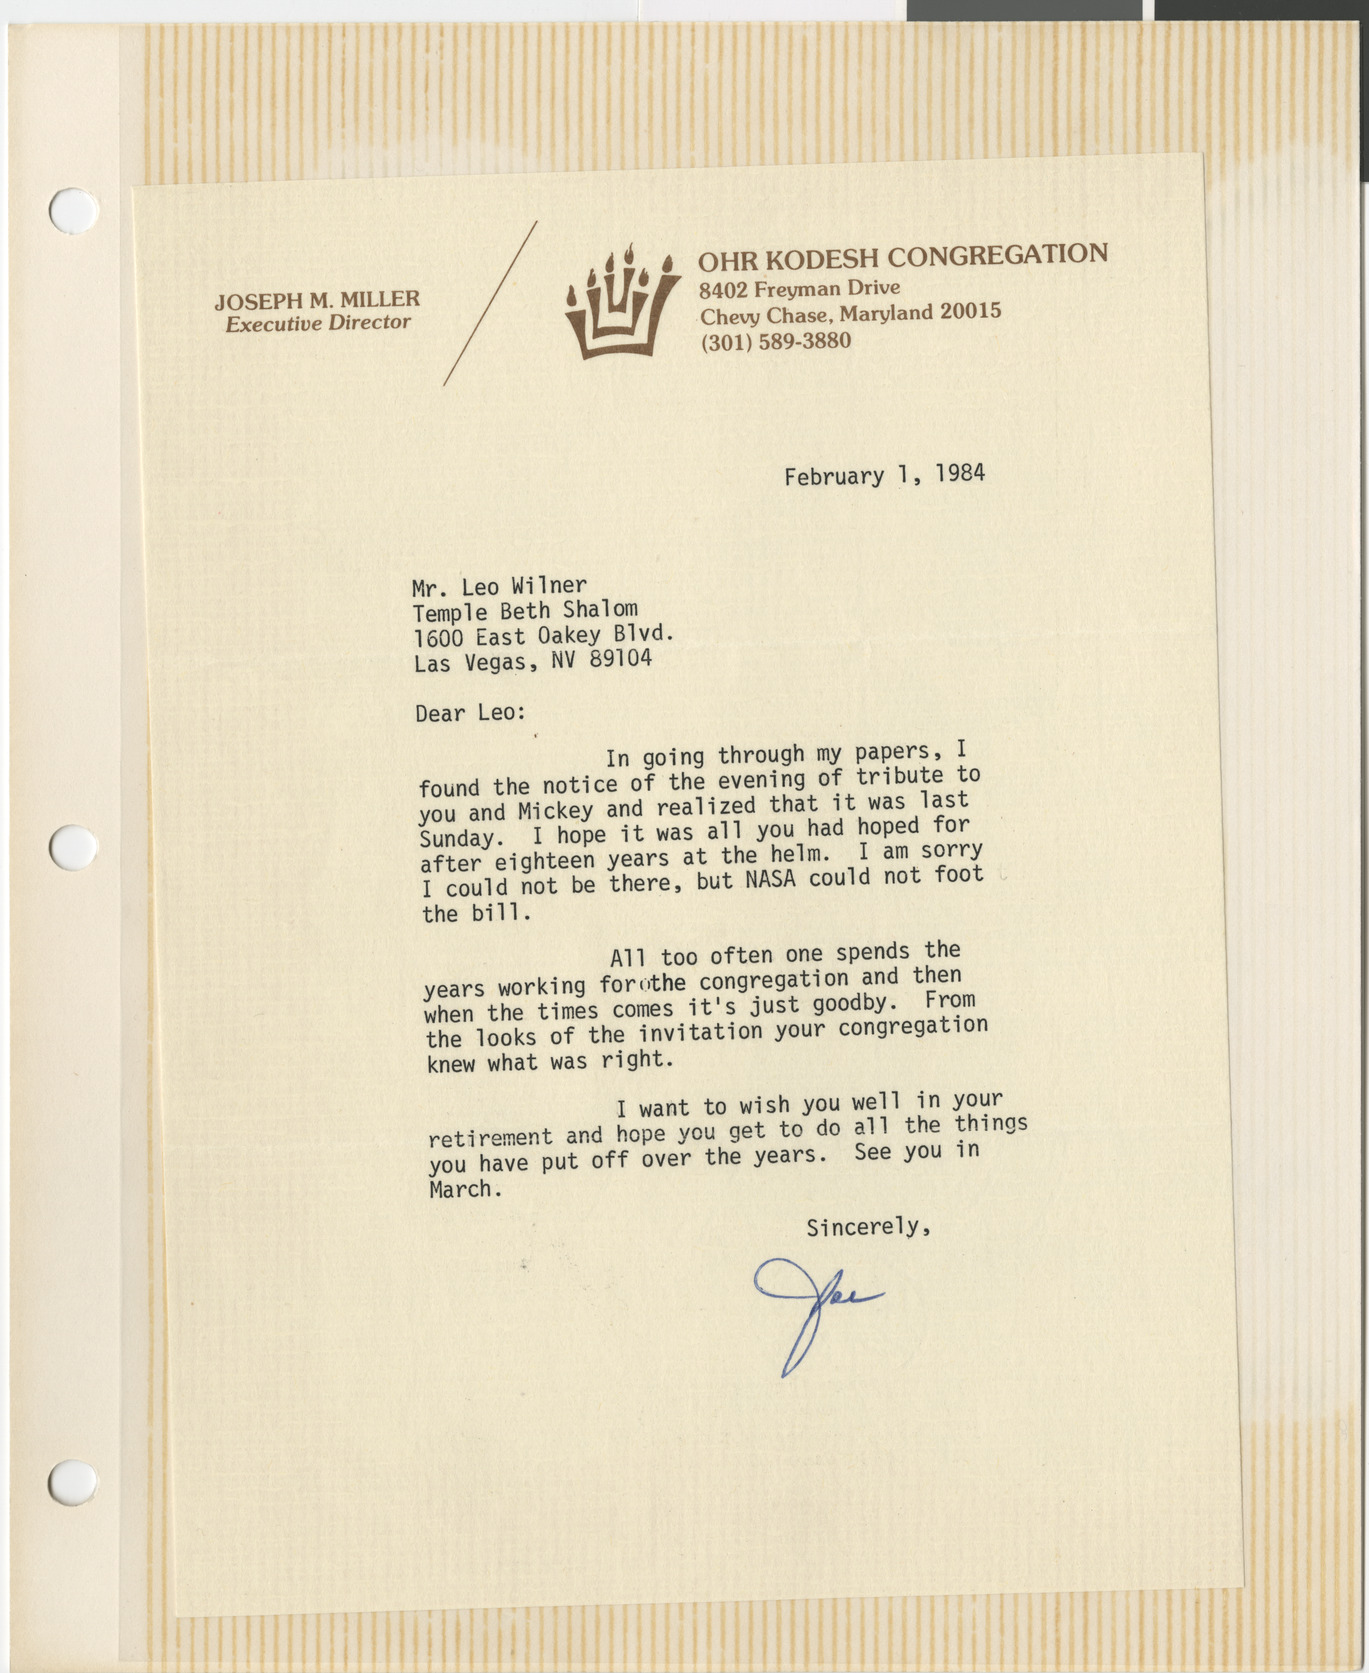 Letter from Joseph Miller (Ohr Kodesh Congregation, Chevy Chase, Md.) to Leo Wilner, February 1, 1984